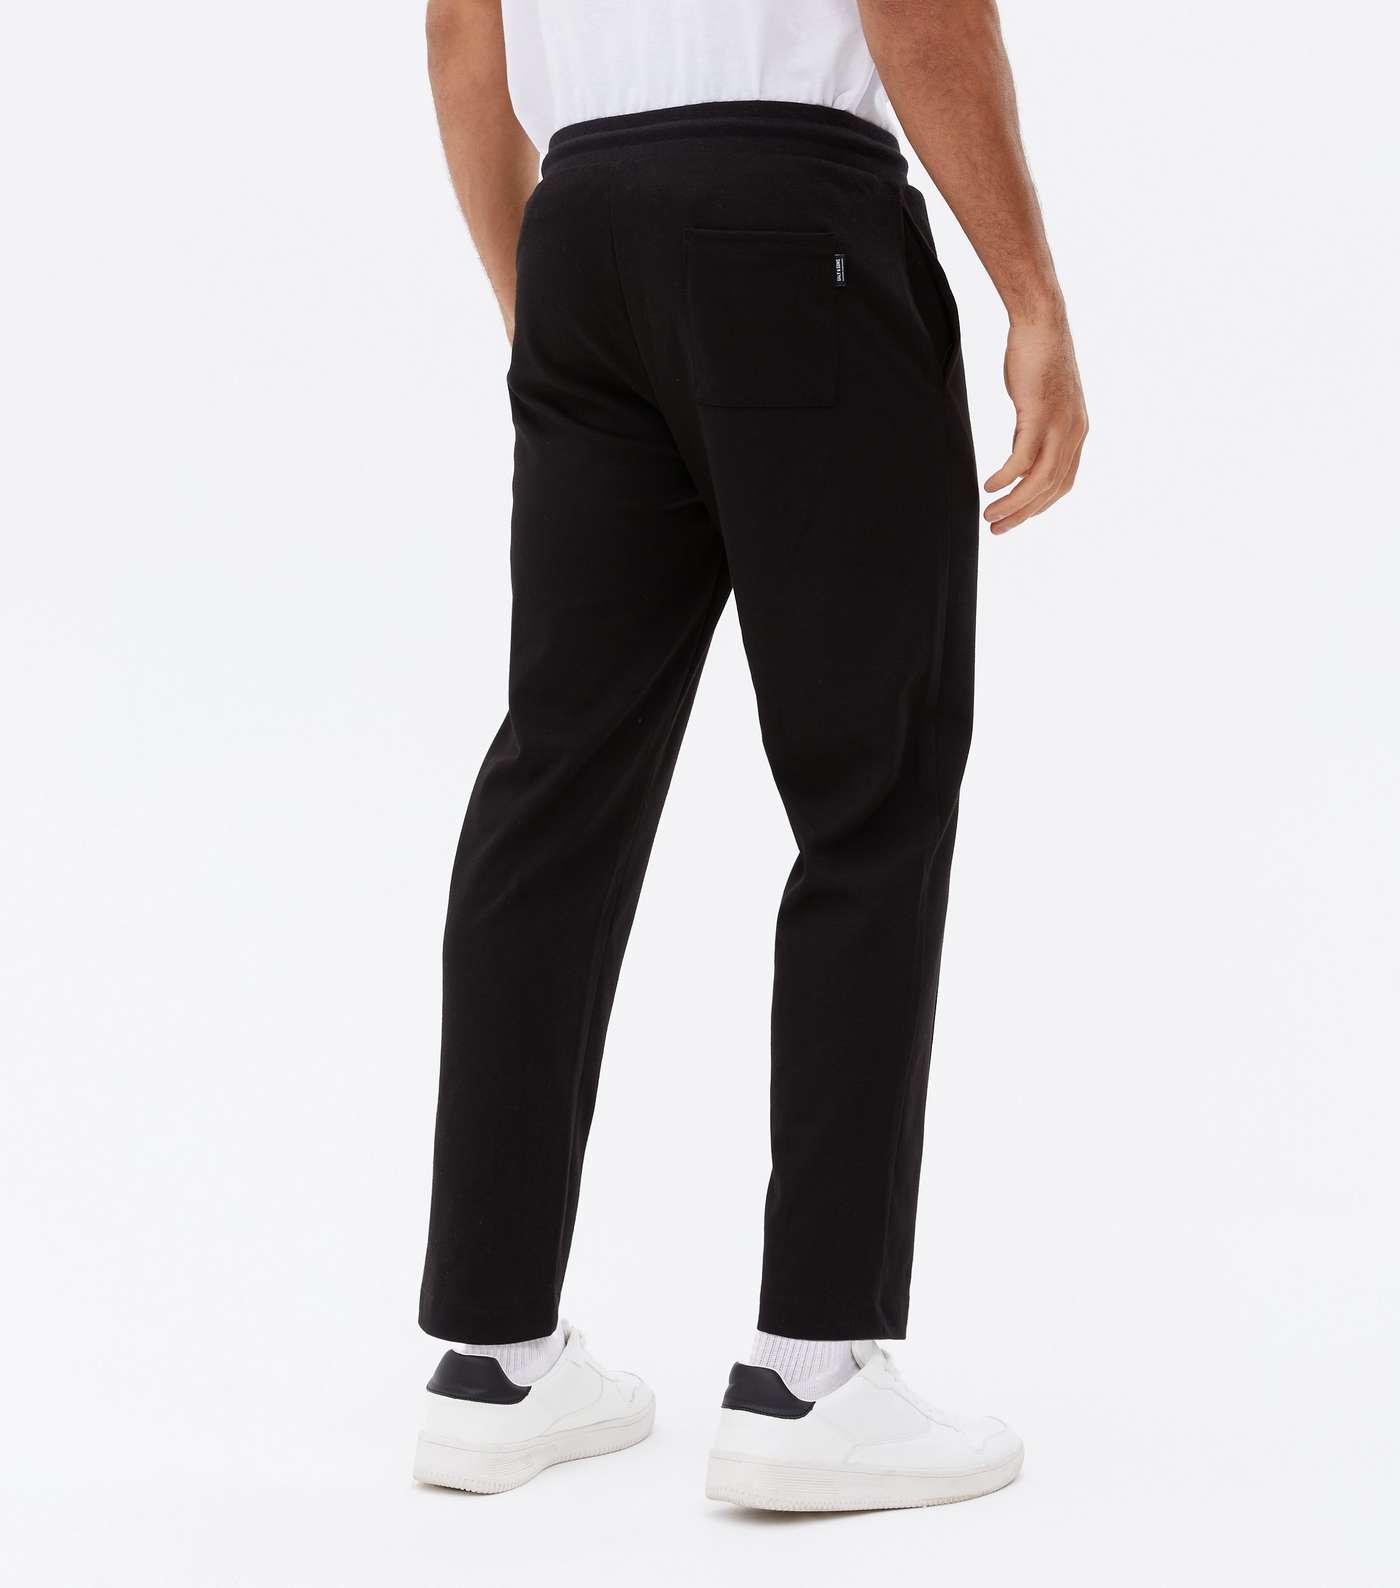 Only & Sons Black Pintuck Tie Waist Joggers Image 4